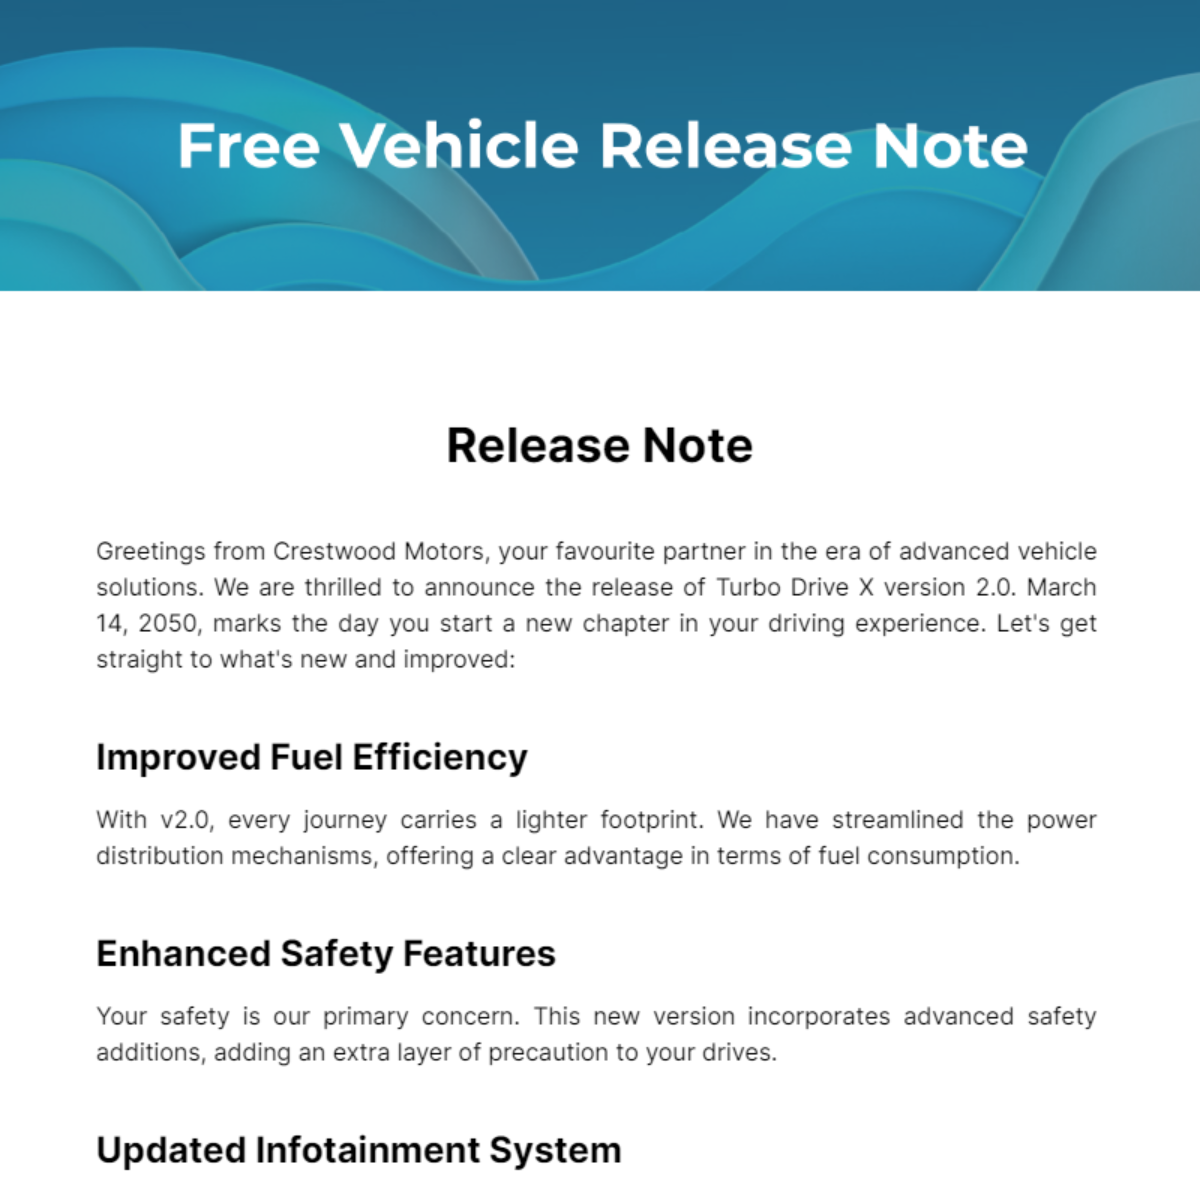 Vehicle Release Note Template